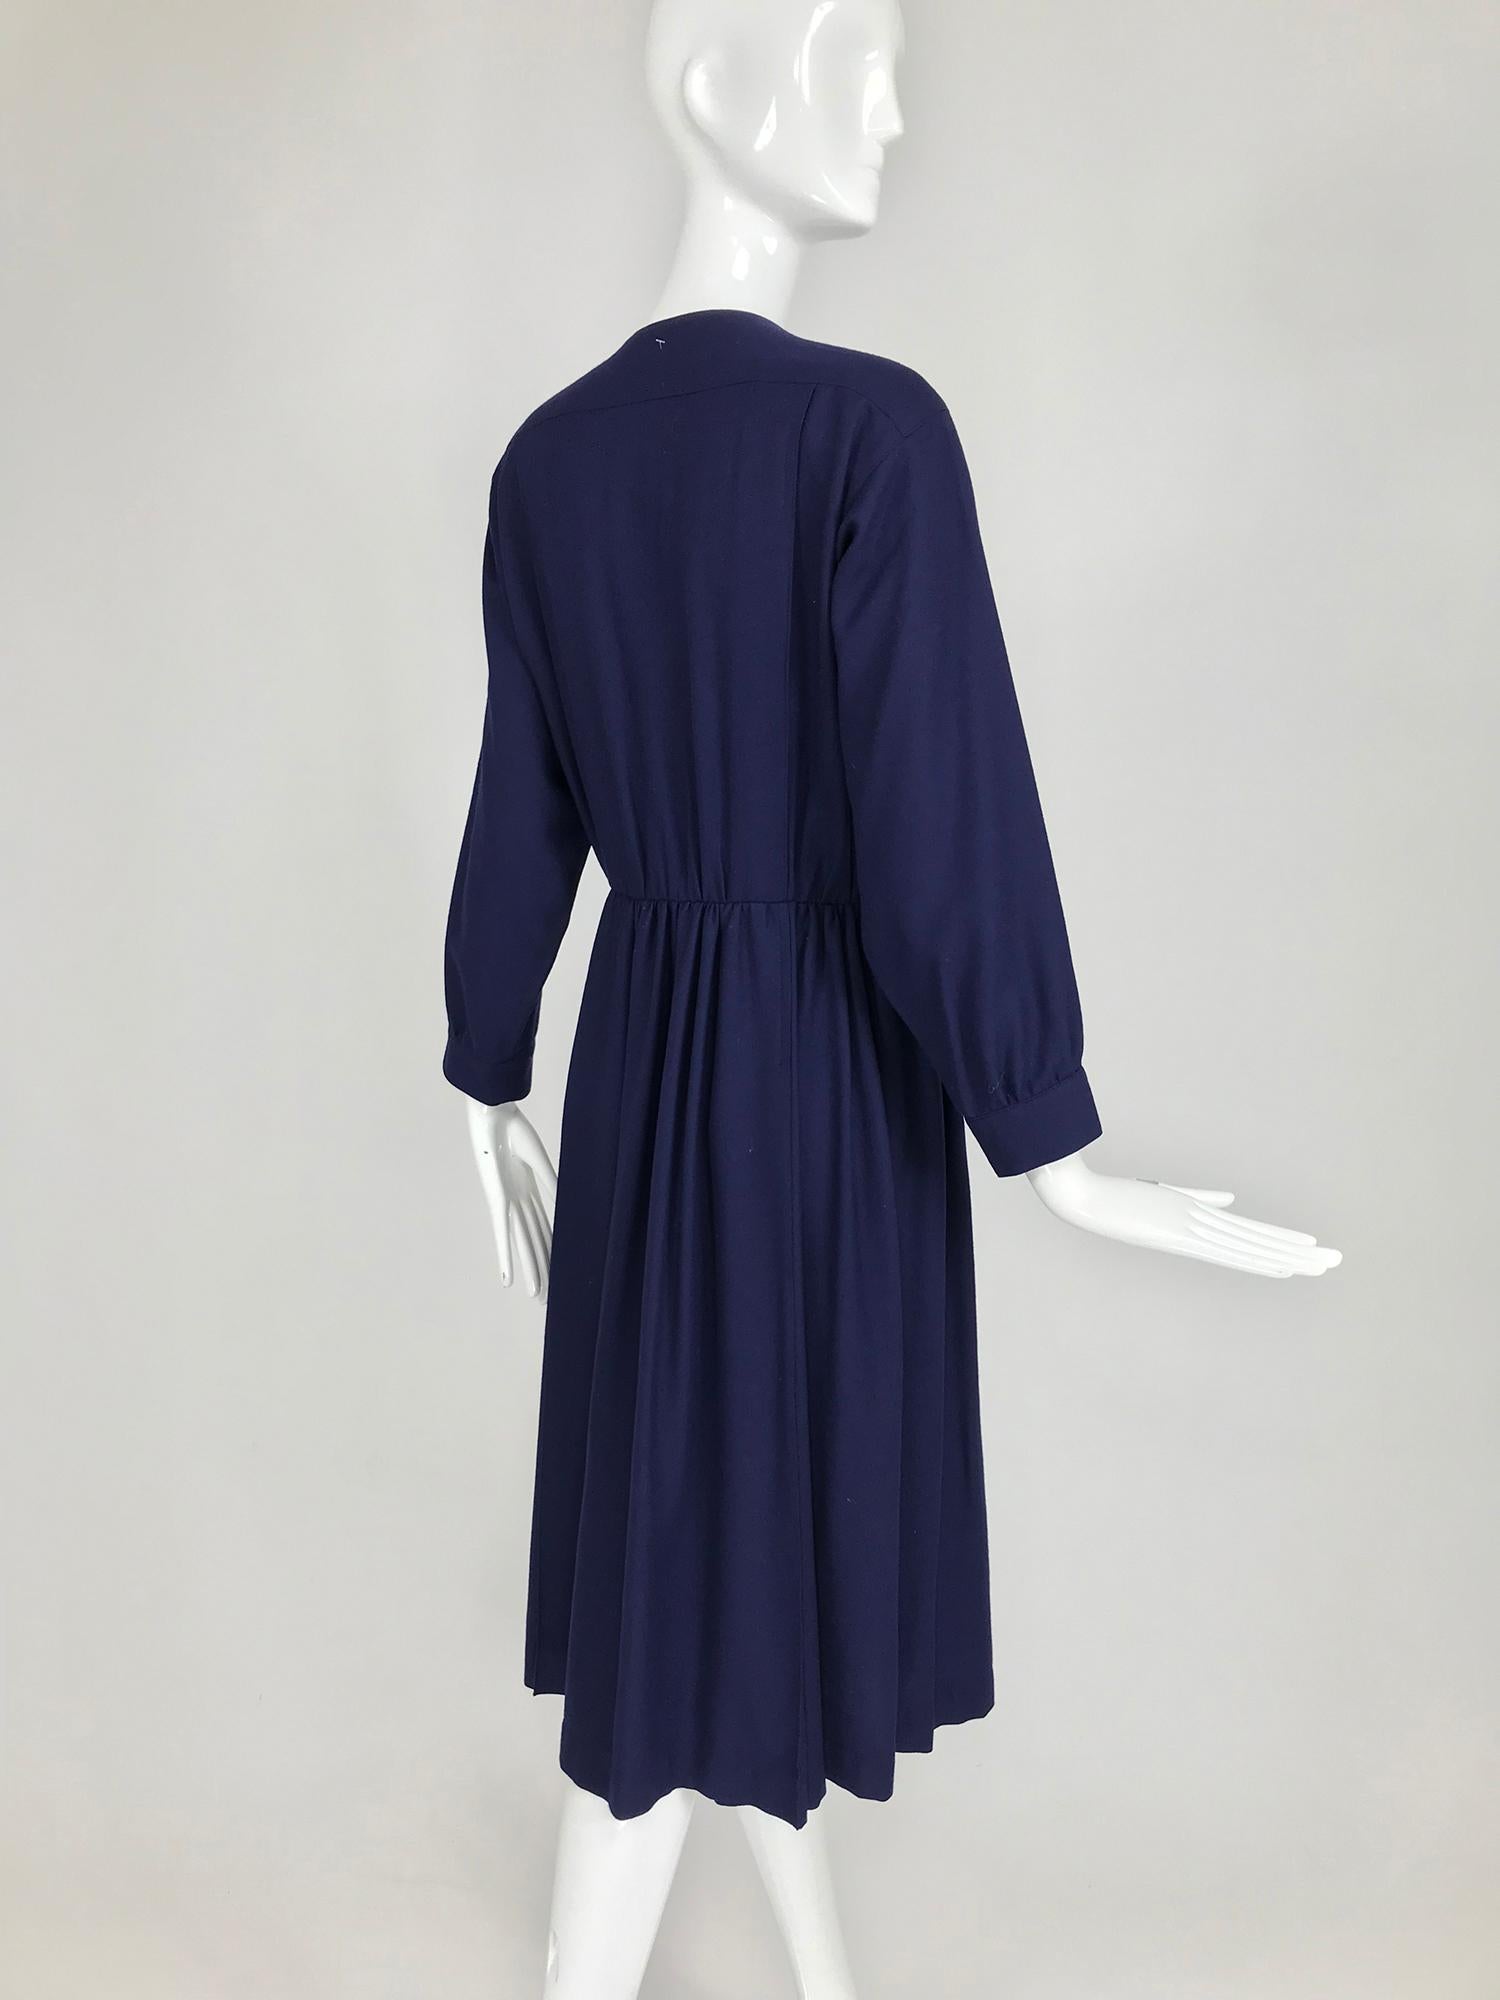 Chloe 1981 Karl Lagerfeld Blue Embroidered Button Front Dress Documented 8